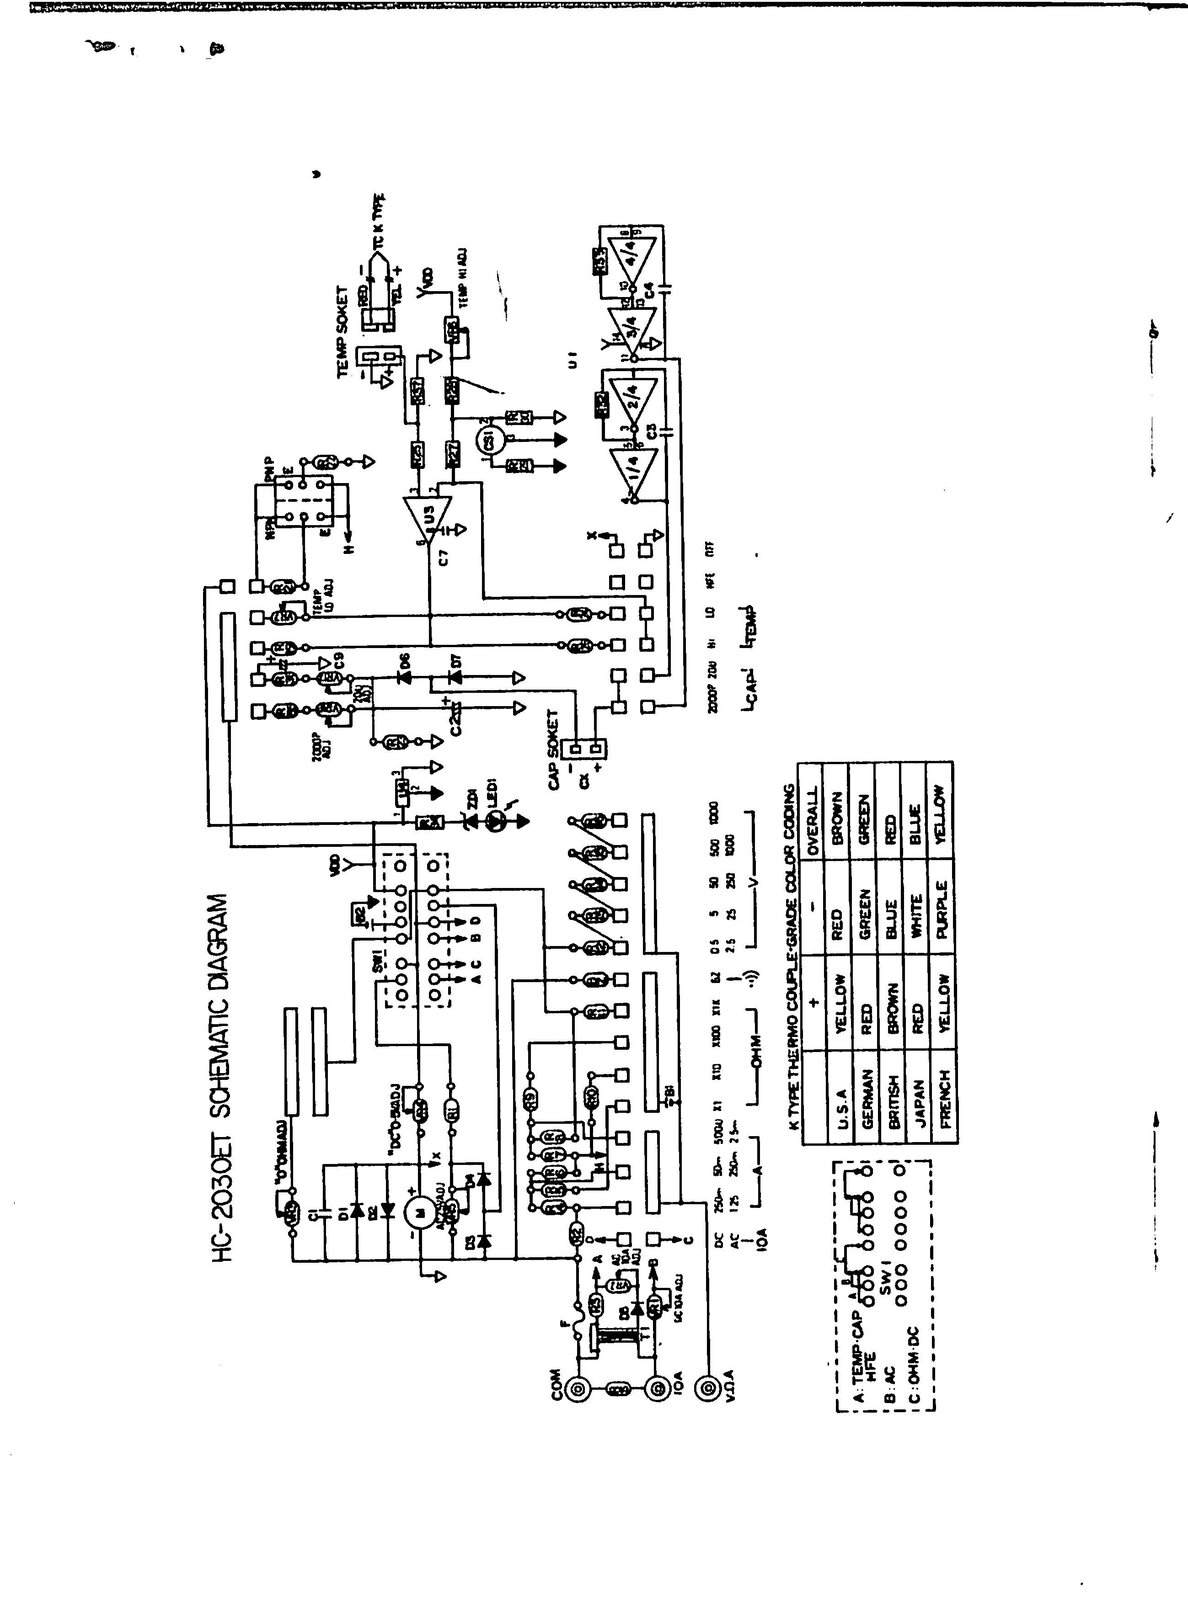 Hung Chang HC-2030ET Schematics and circuit diagram along with component listings regarding the repair and service and repair of the Hang Chang VOM multi meter.